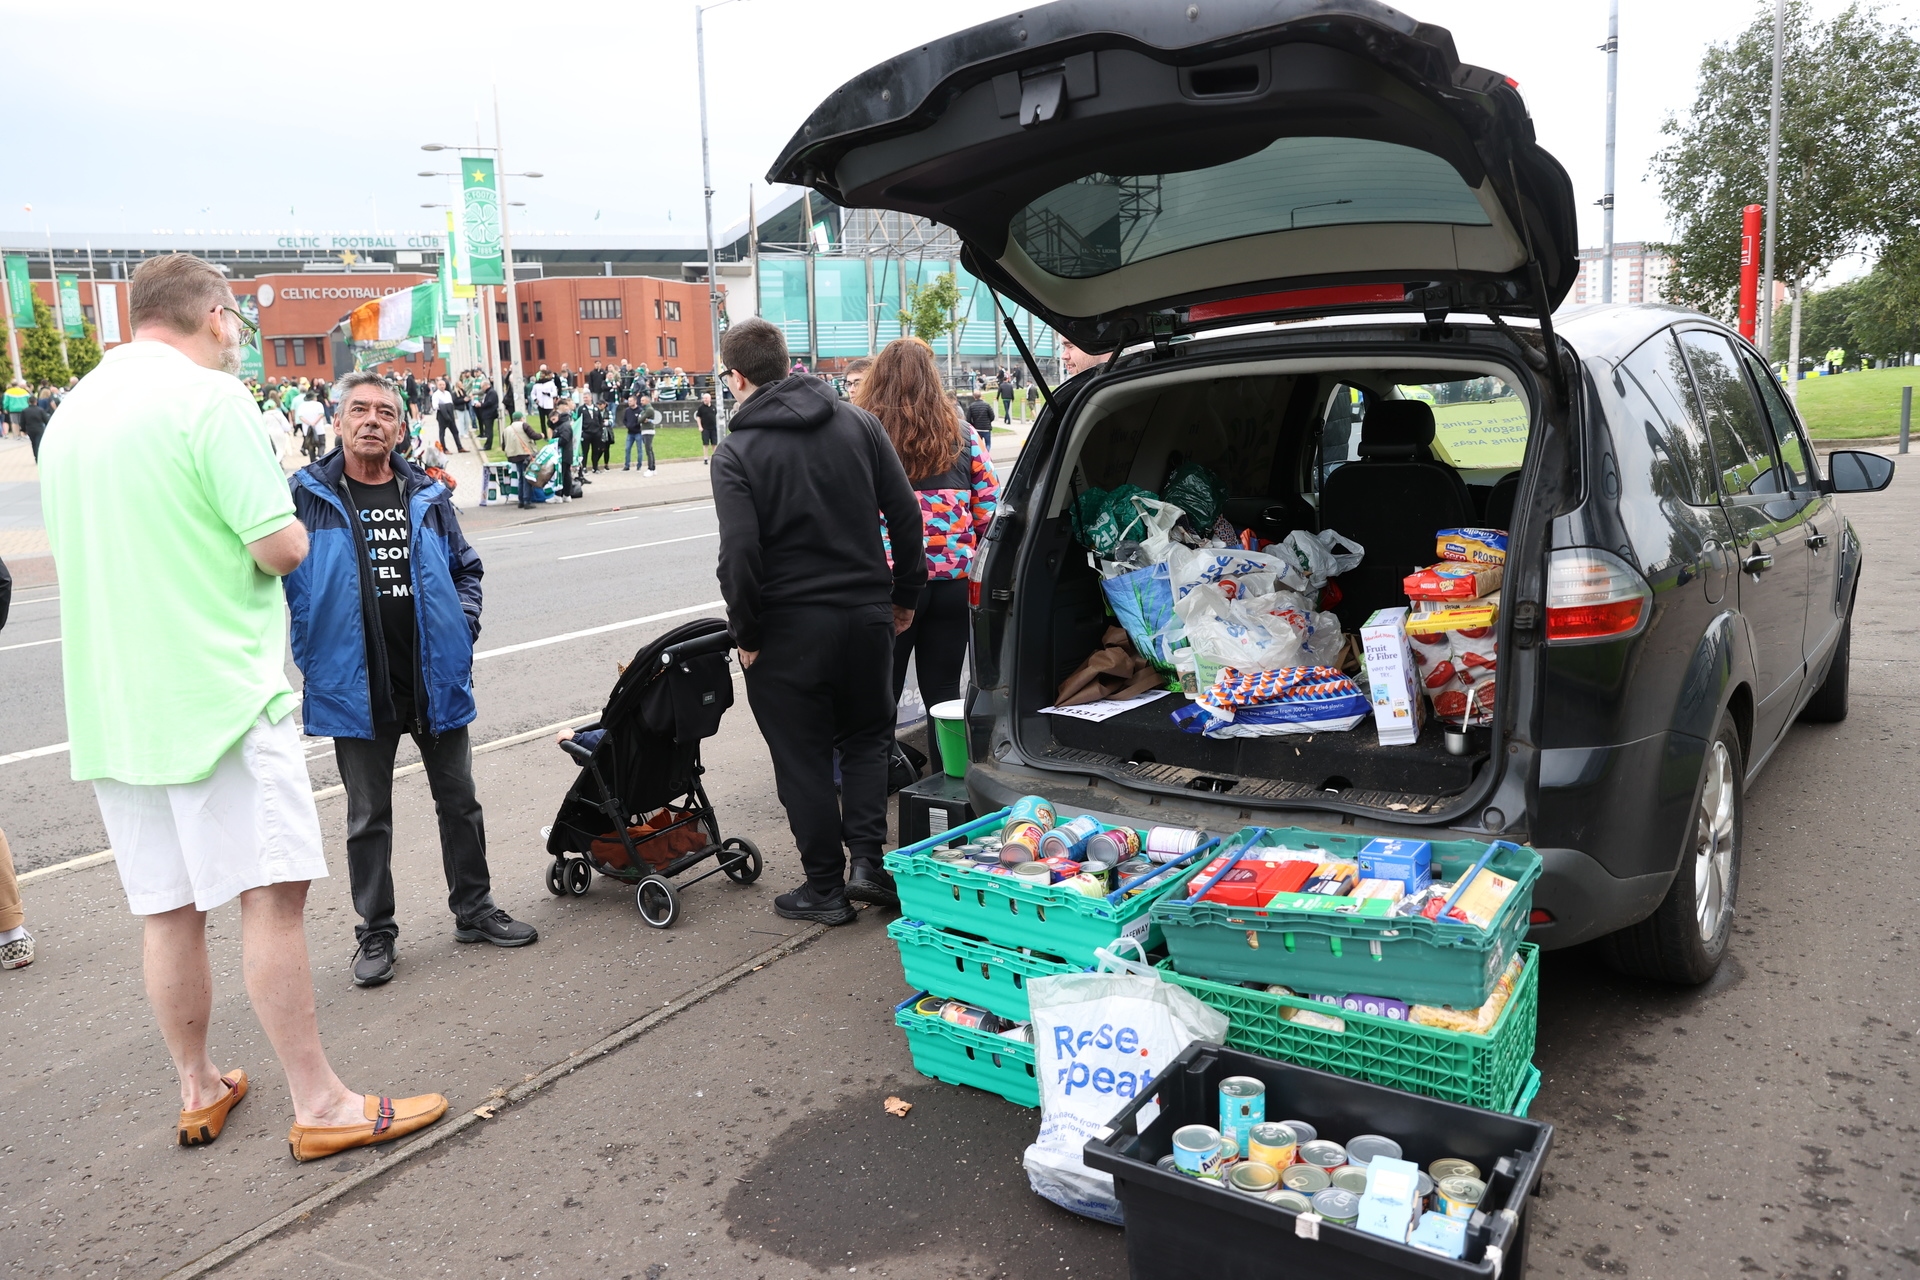 The collection was organised ahead of the Old Firm match.